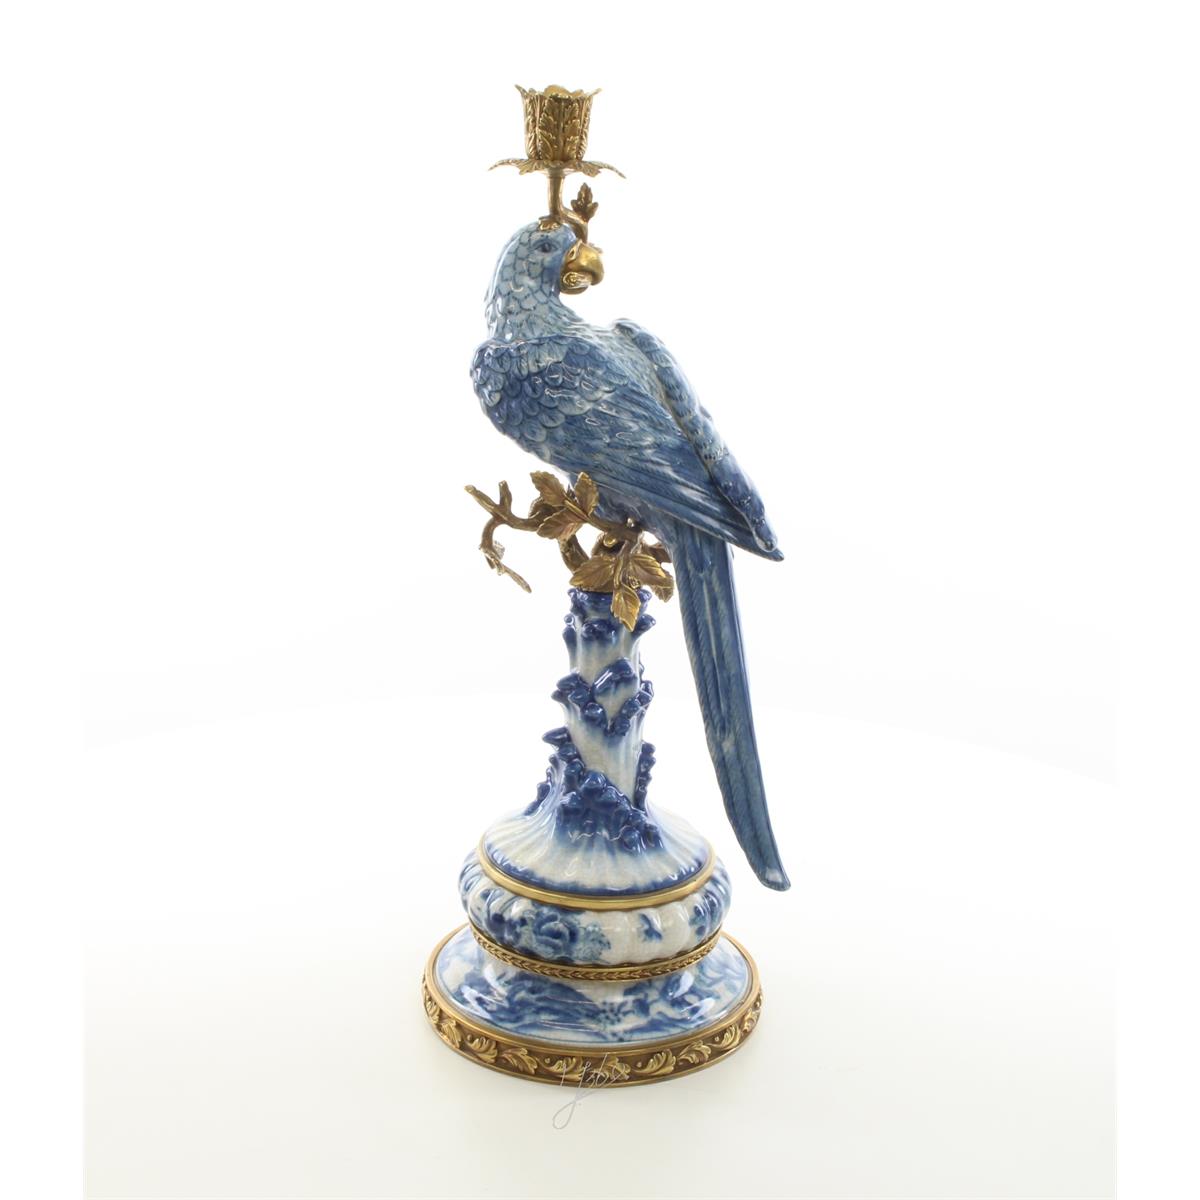 A BRONZE MOUNTED PORCELAIN PARROT CANDLE HOLDER